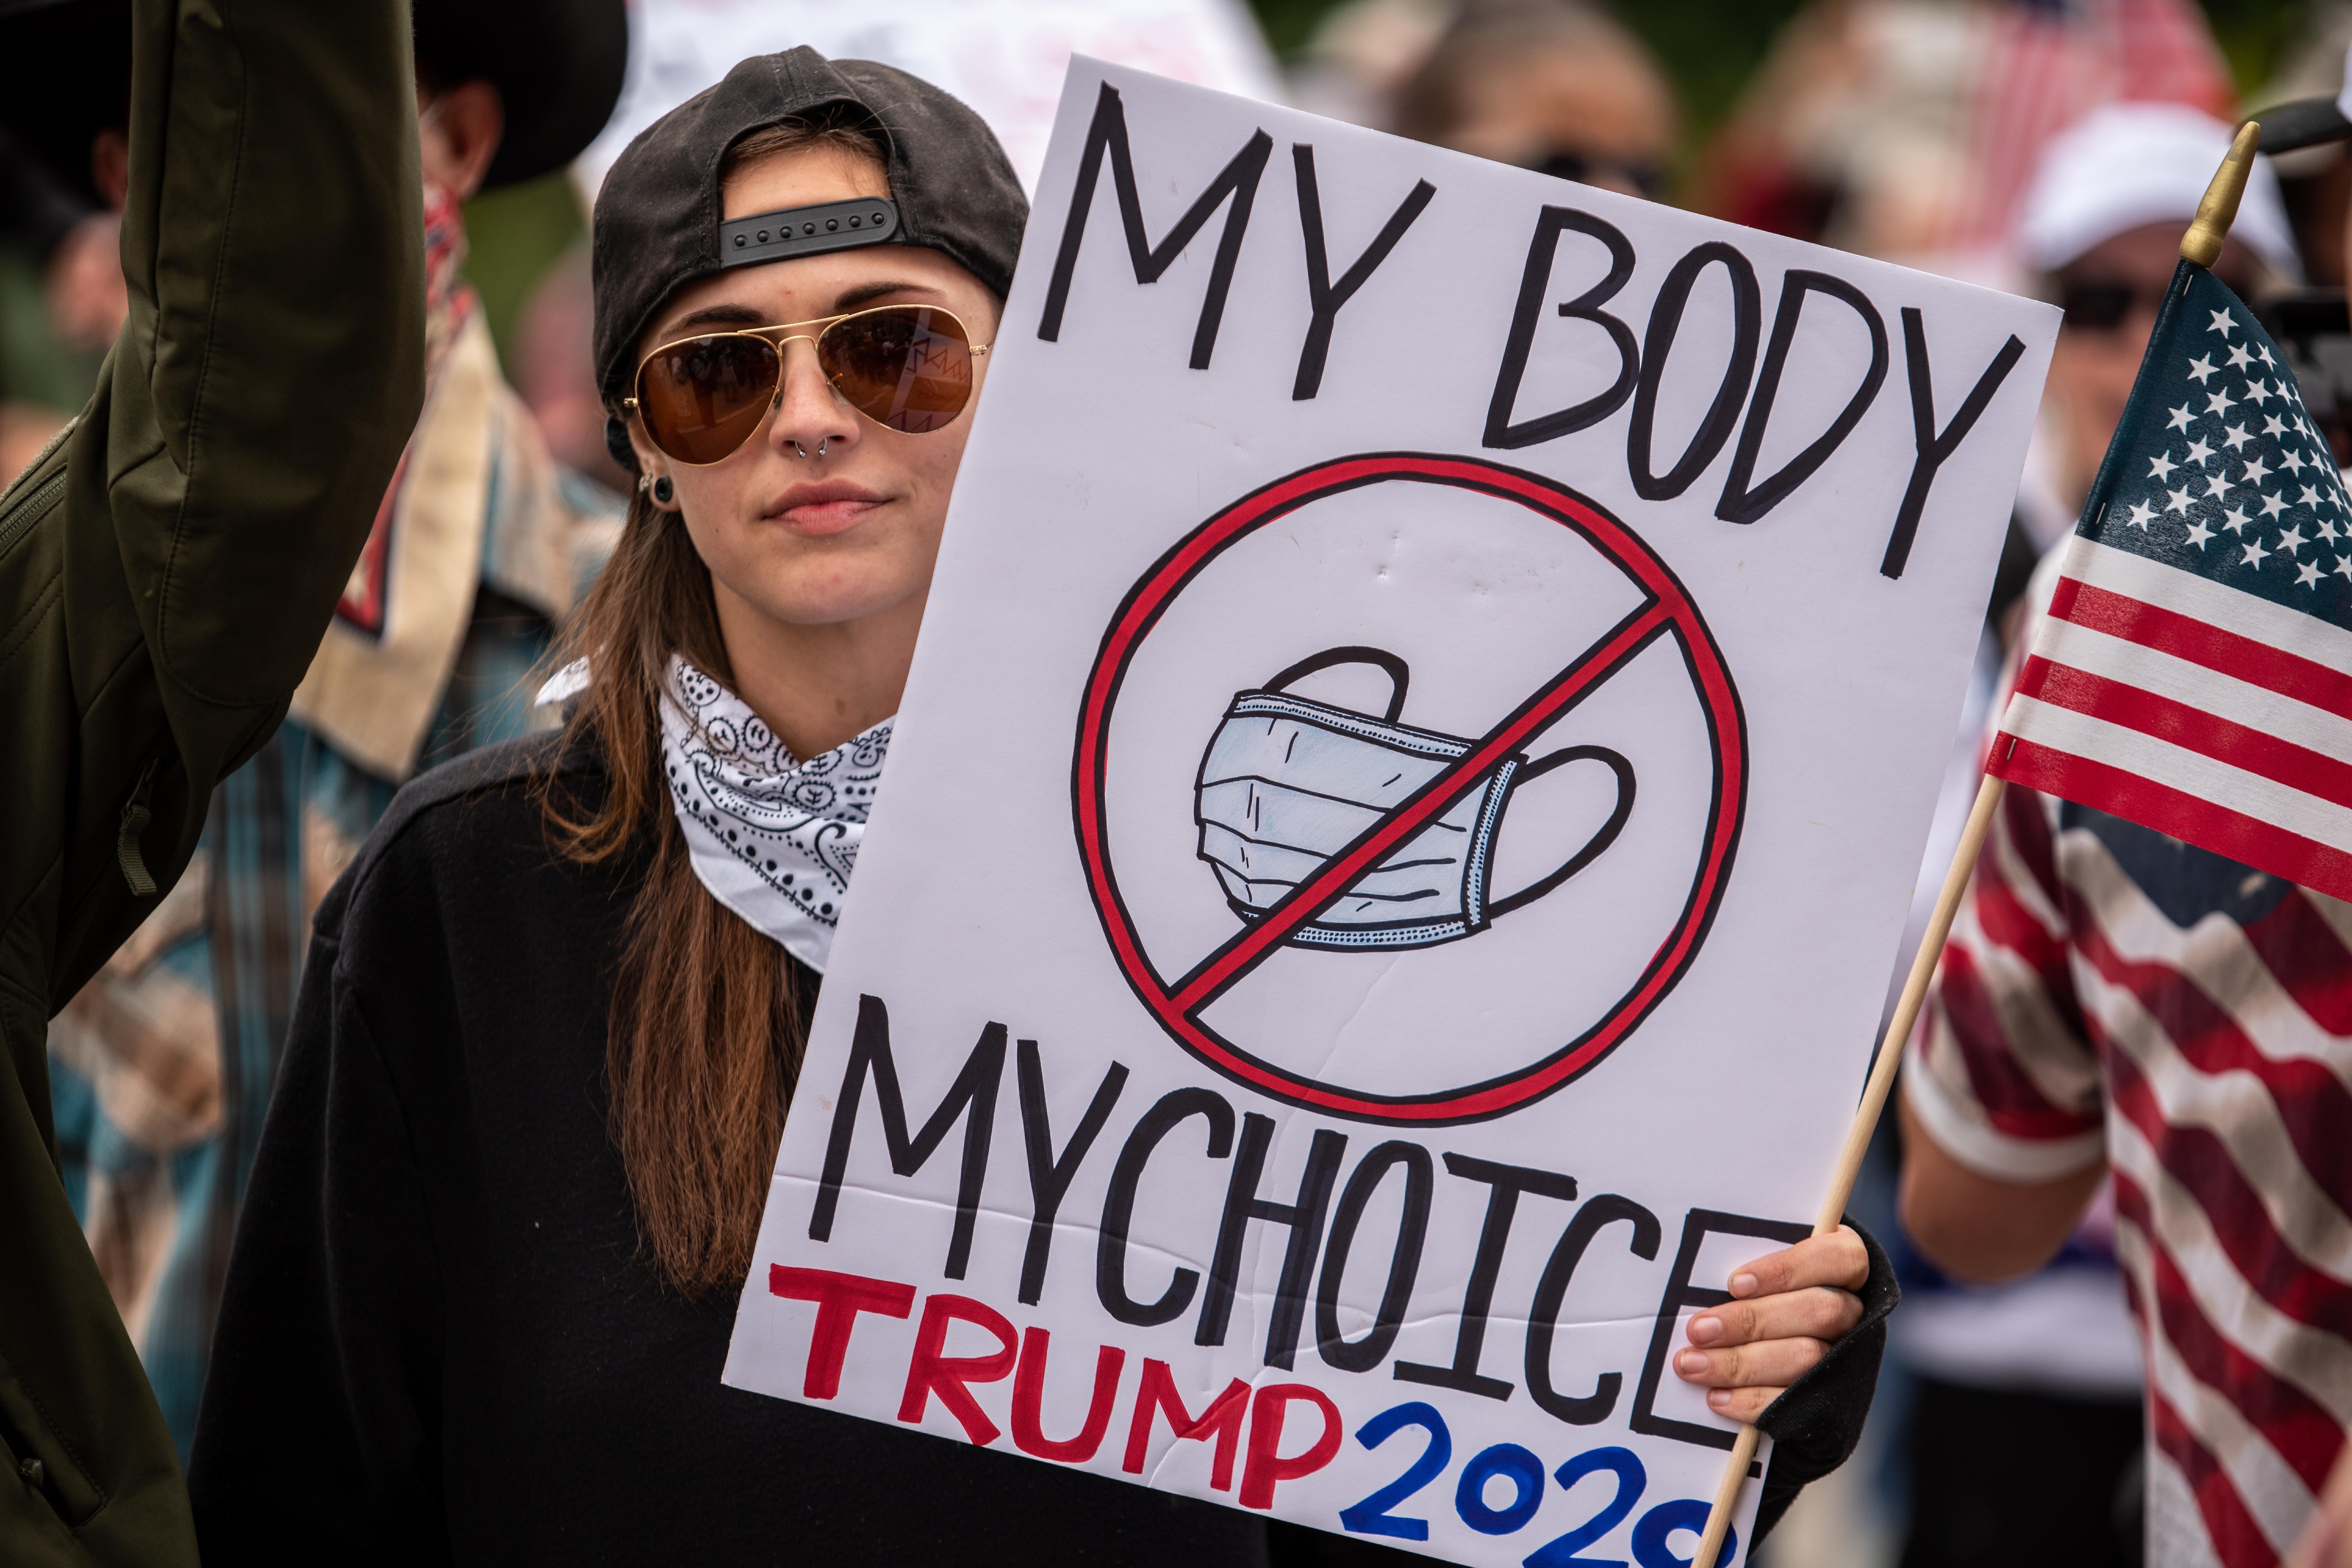 A woman holds up an American flag and an anti-mask-wearing sign that says "My Body My Choice Trump 2020"